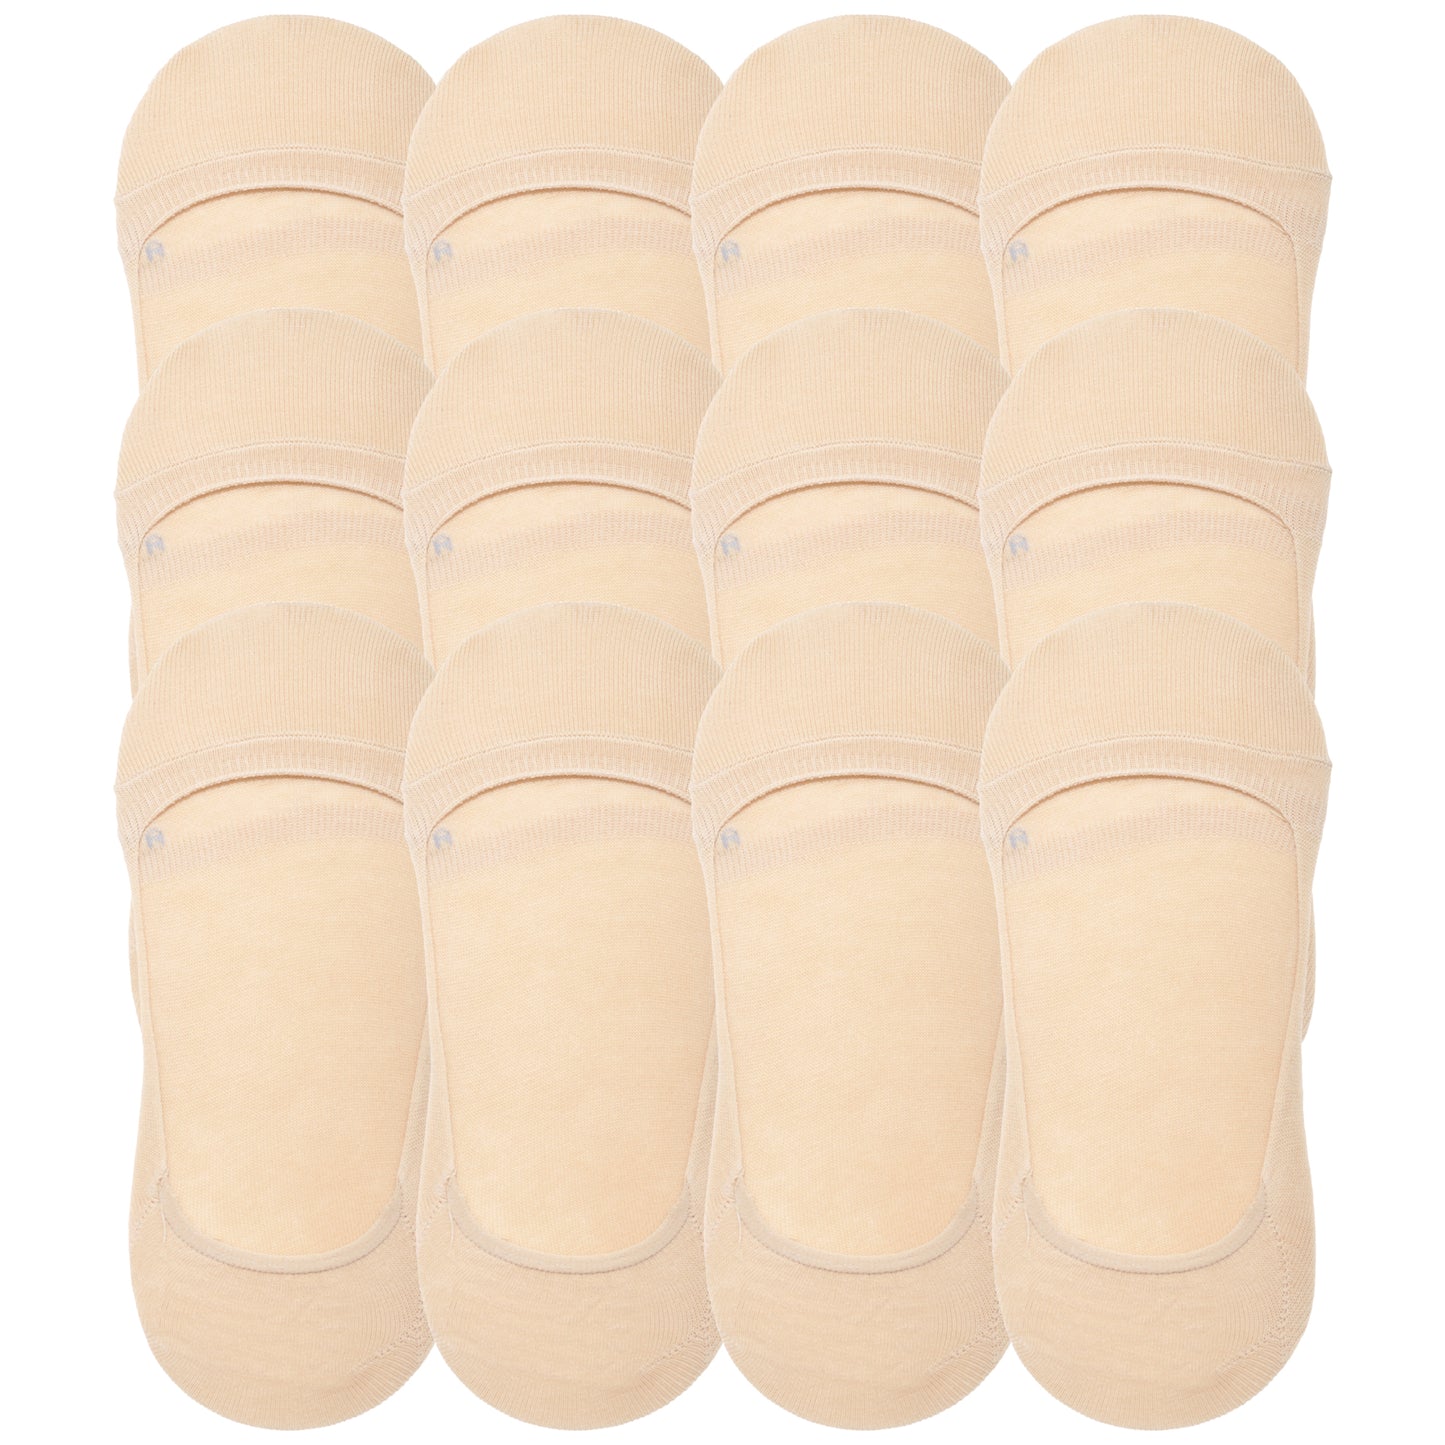 Angelina Comfort Liner Socks with Silicone Heel Grip (12-Pairs), #SK51